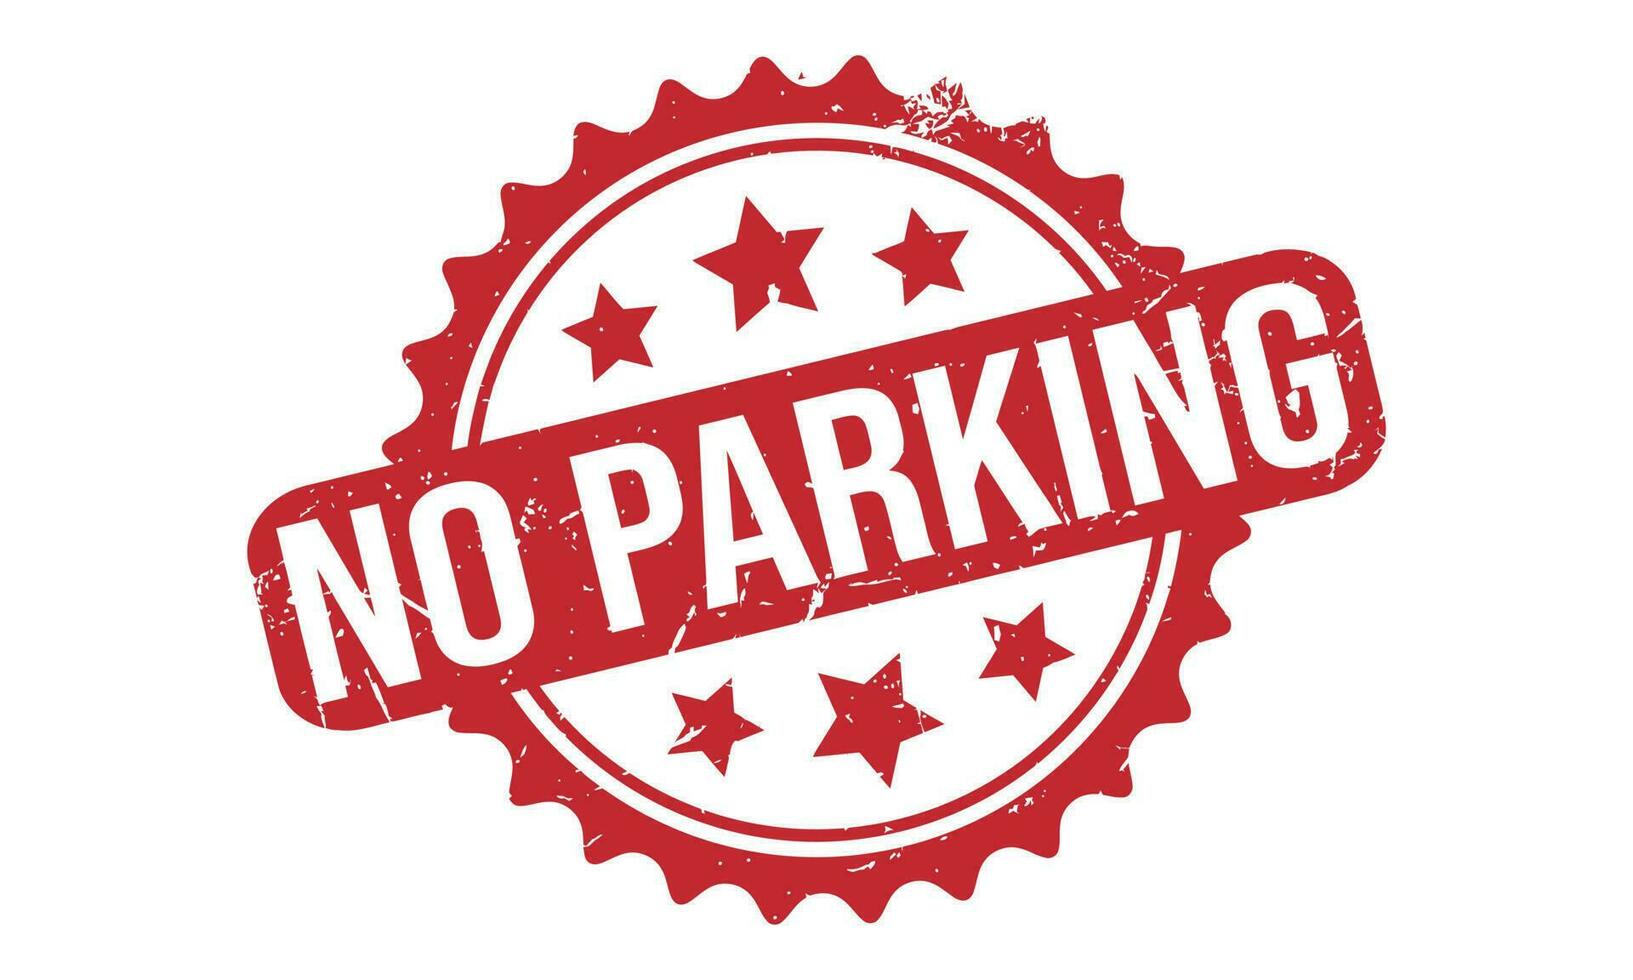 No Parking Rubber Stamp Seal Vector